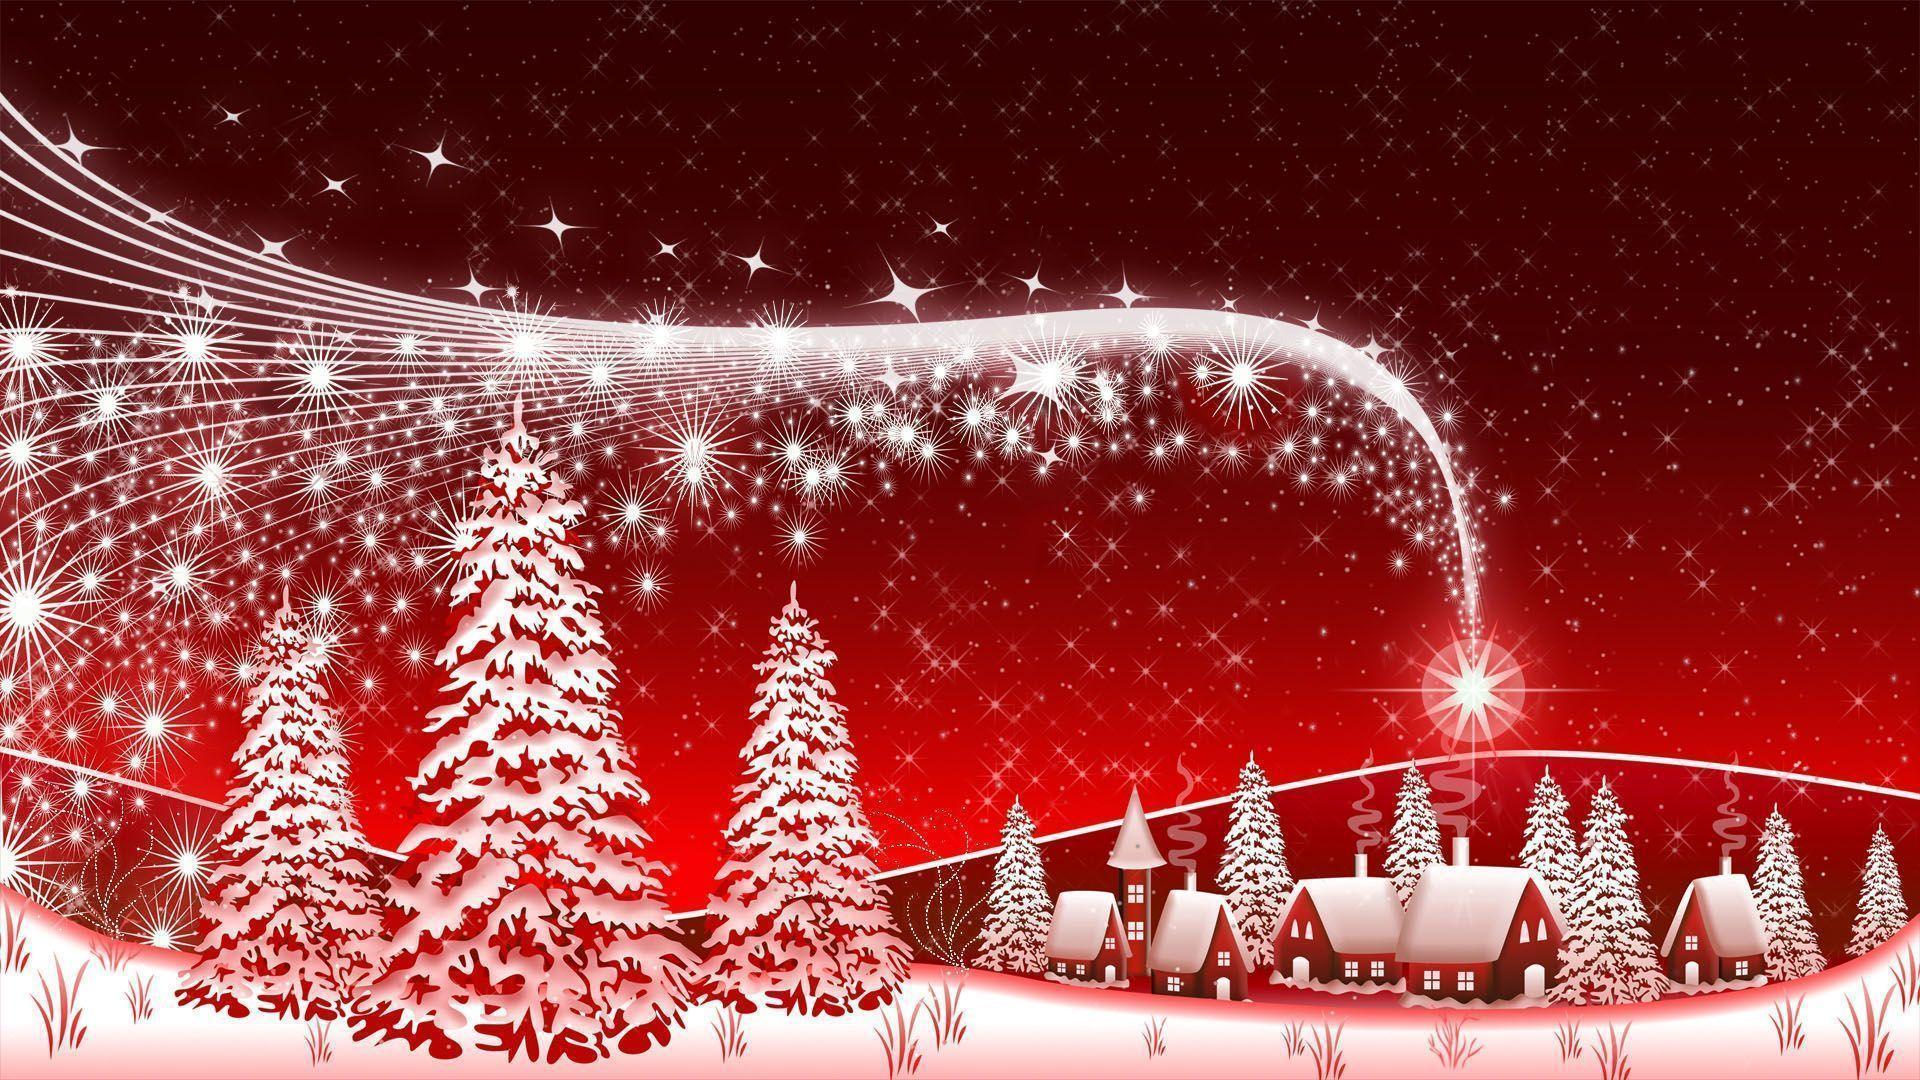 Red Winter Christmas Wallpaper Picture 73524 Wallpaper